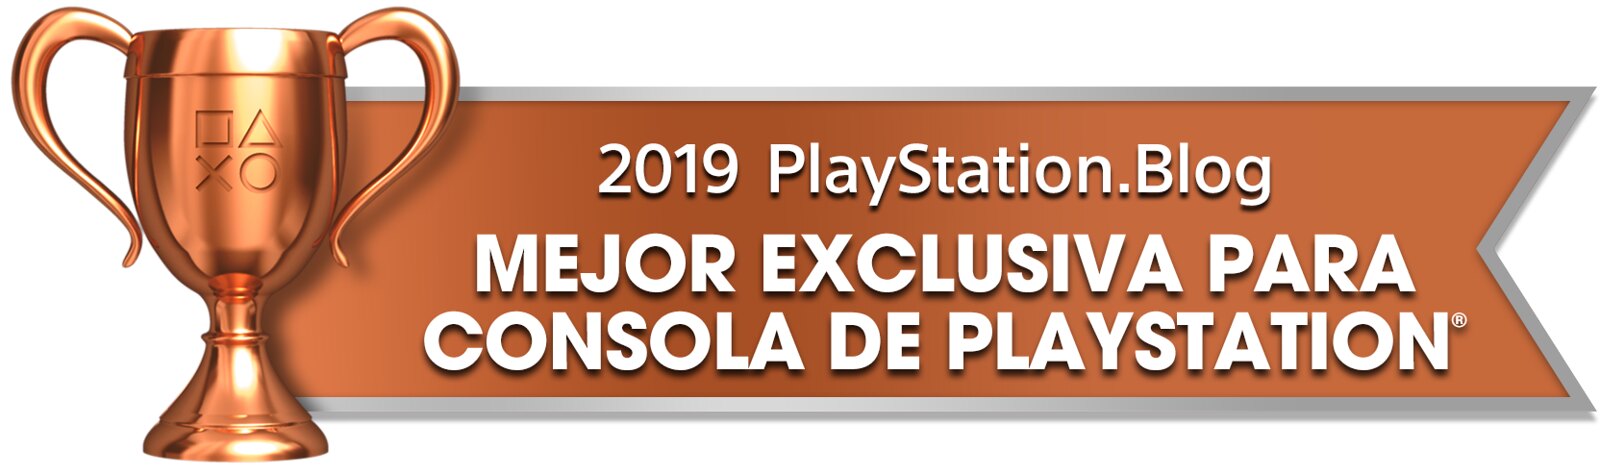 PS Blog Game of the Year 2019 - Best Console Exclusive - 4 - Bronze